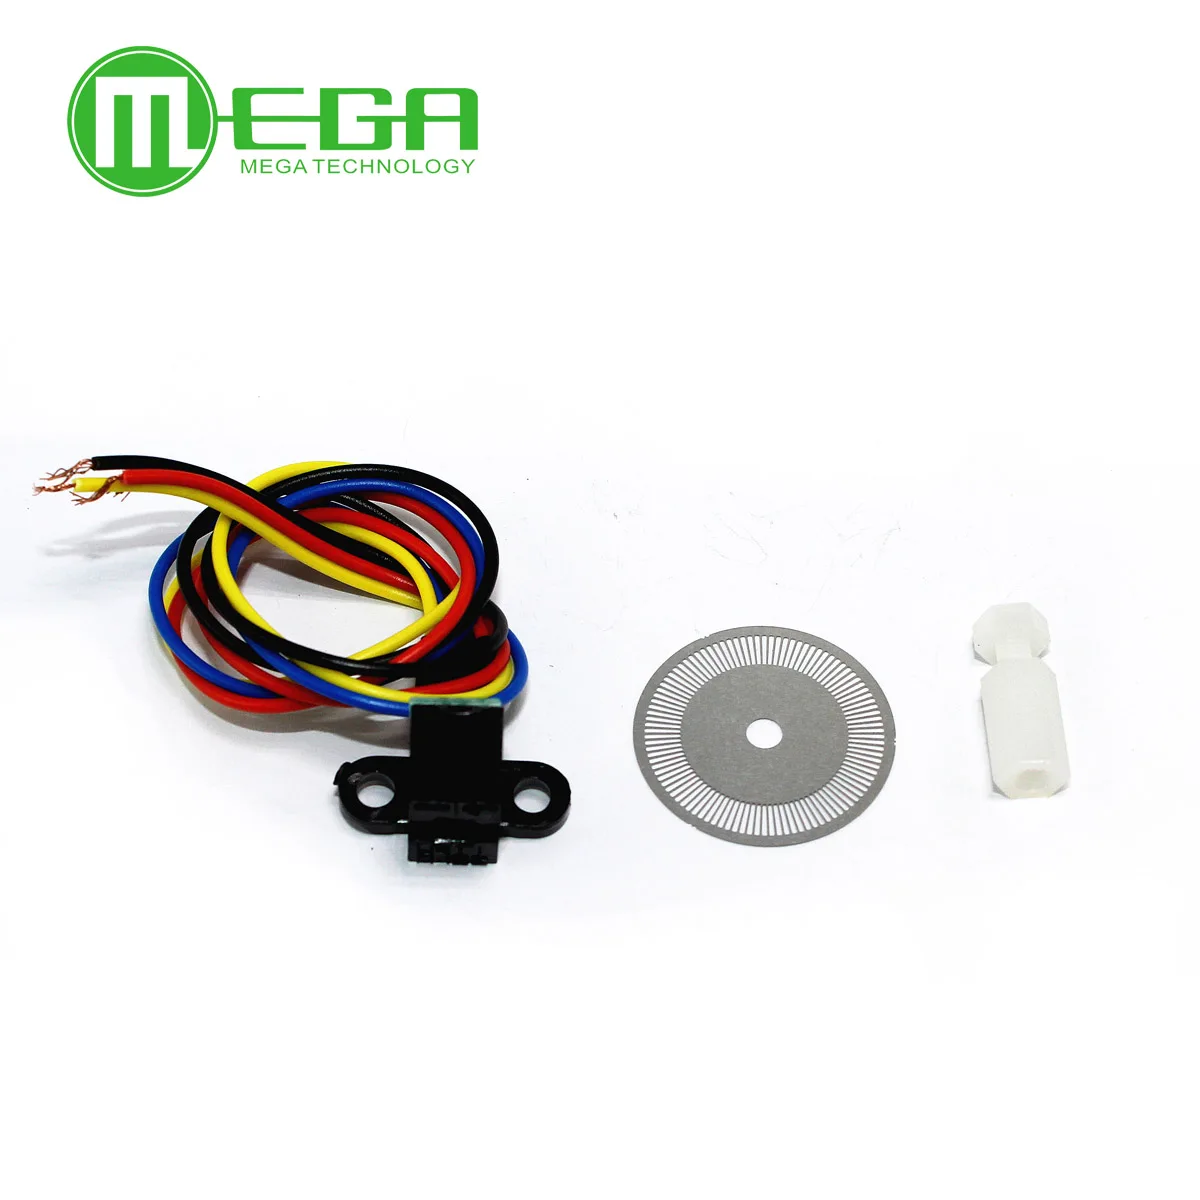 Photoelectric Speed Sensor Encoder Coded Disc code wheel for Freescale Smart car 